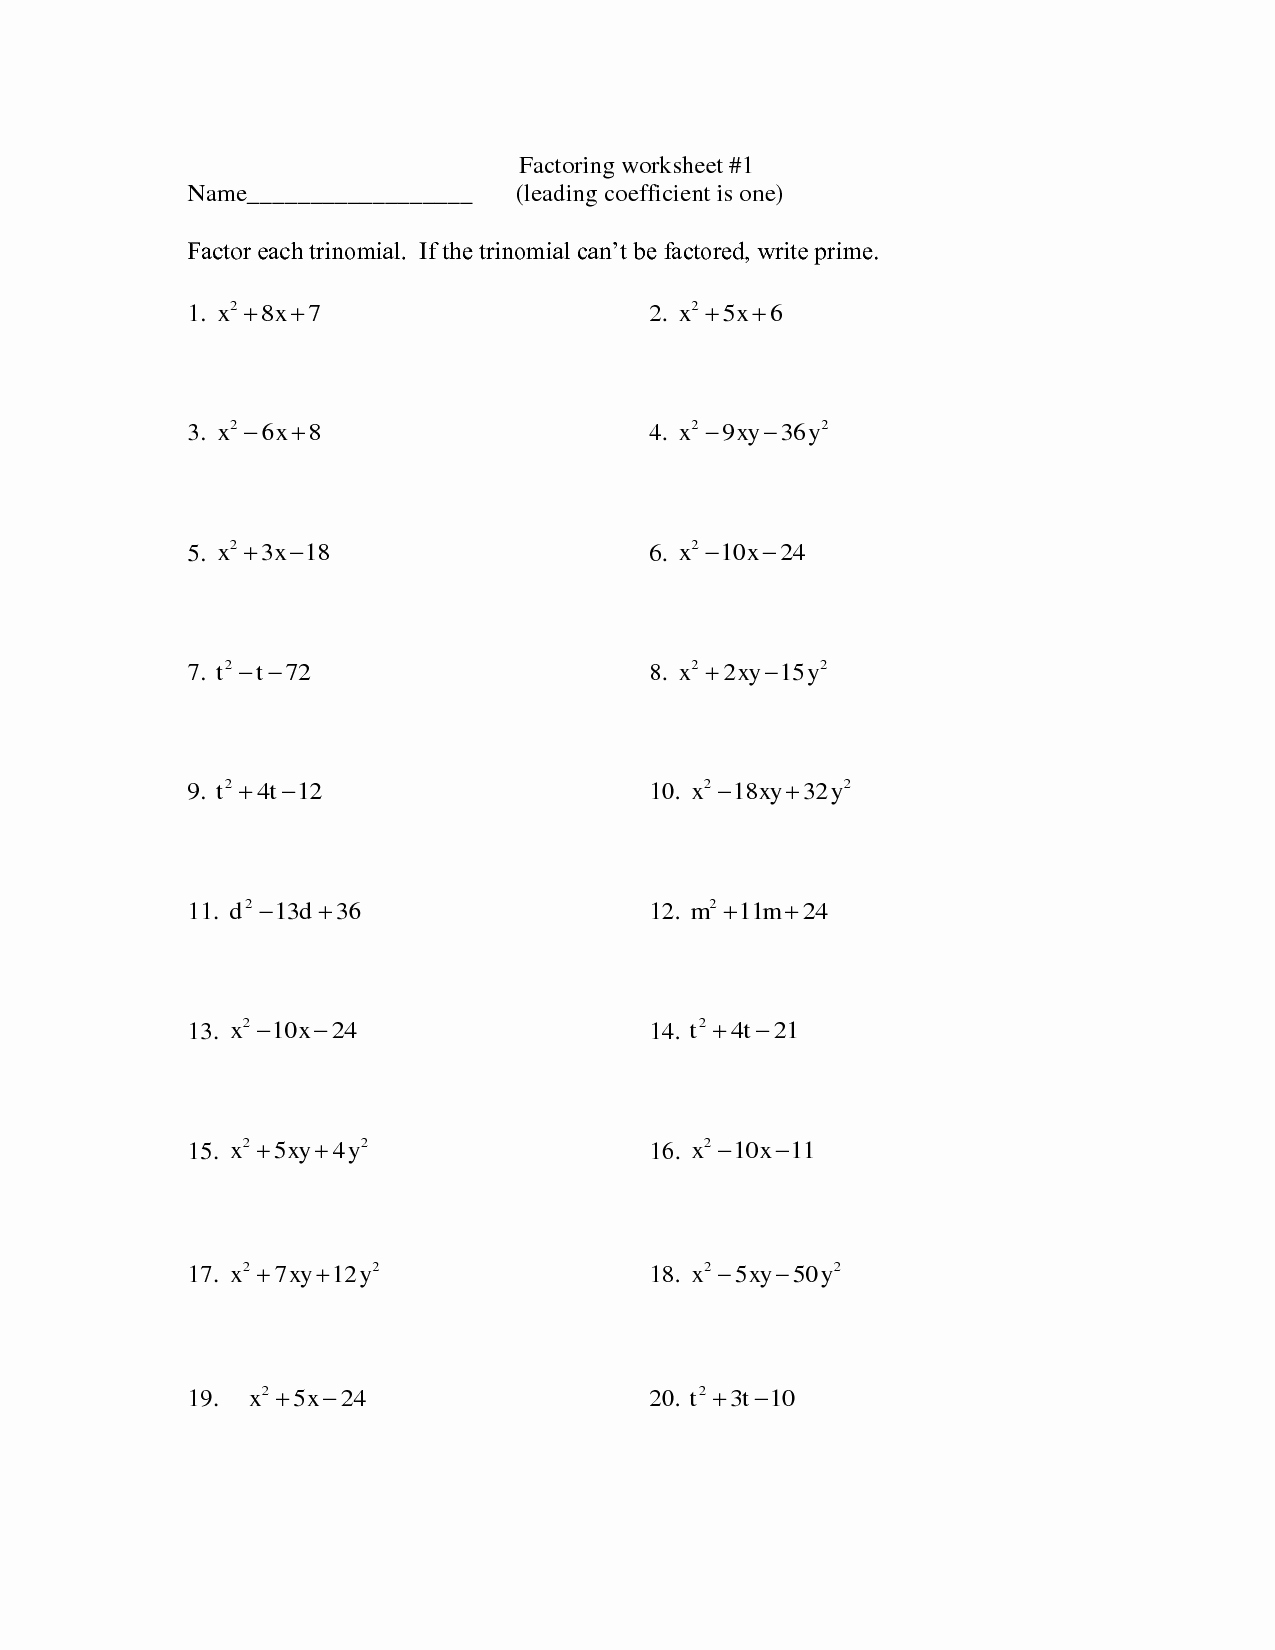 Factoring Polynomials Worksheet with Answers Awesome 11 Best Of Factoring Worksheets Algebra Ii